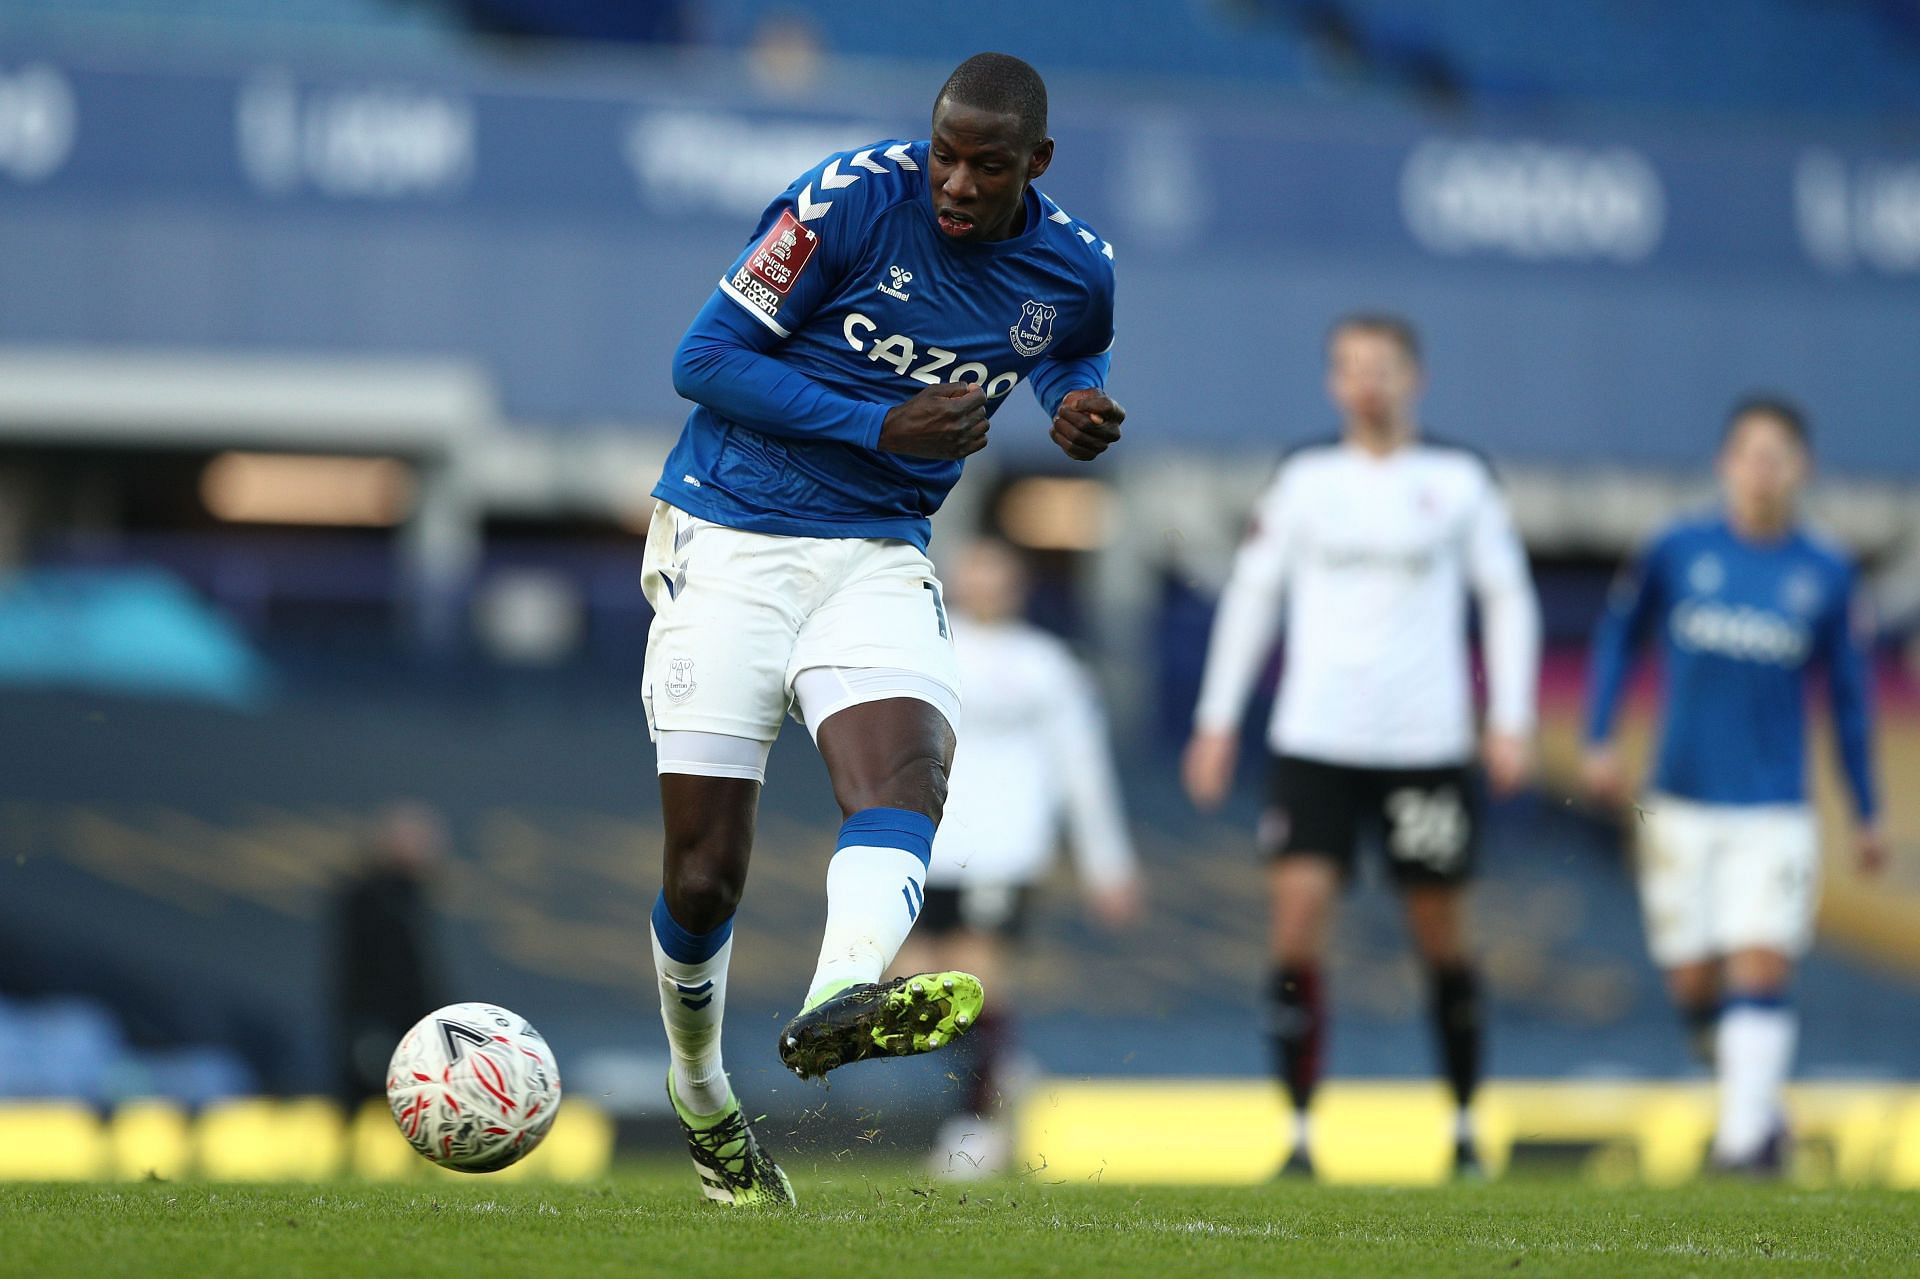 Abdoulaye Doucoure playing for Everton